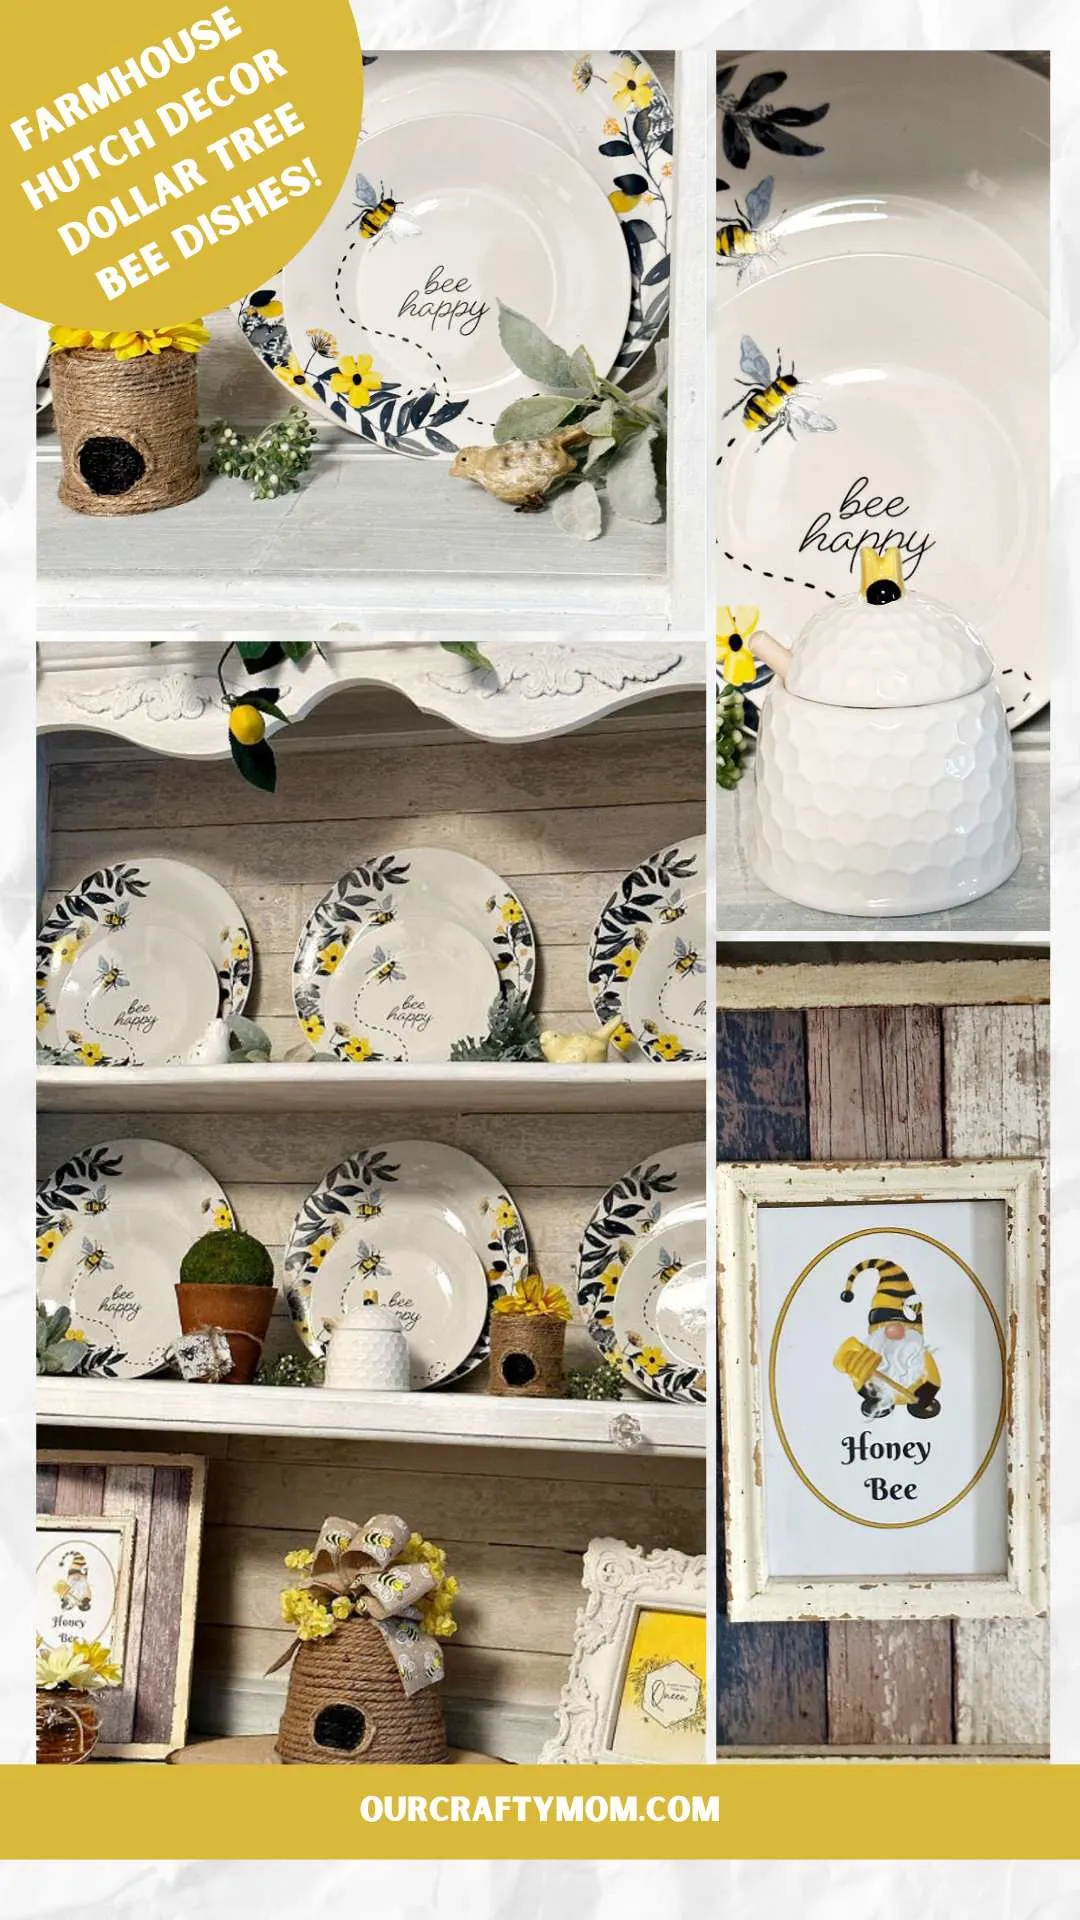 farmhouse hutch decorations with bee plates